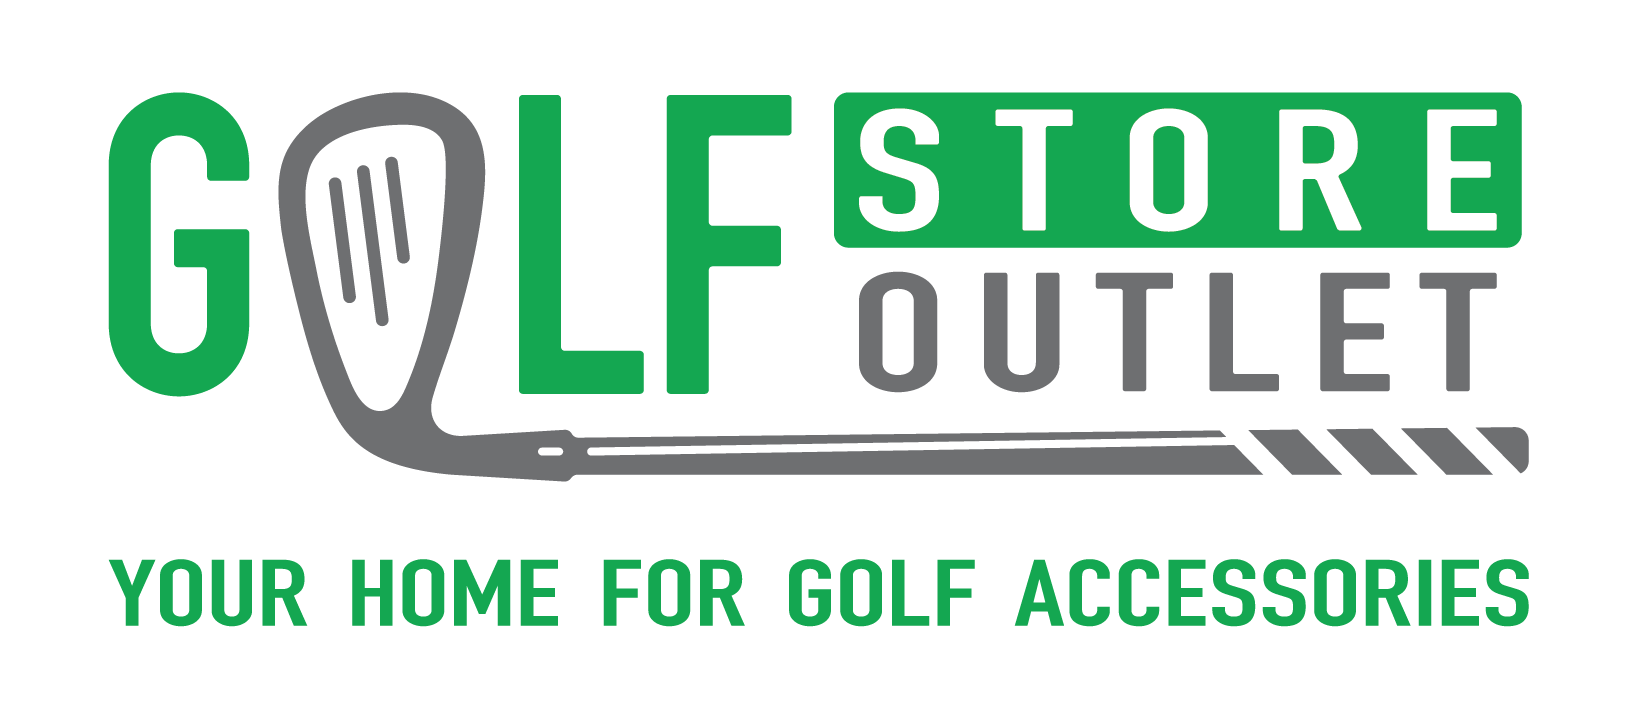 Contact Us – Golf Store Outlet